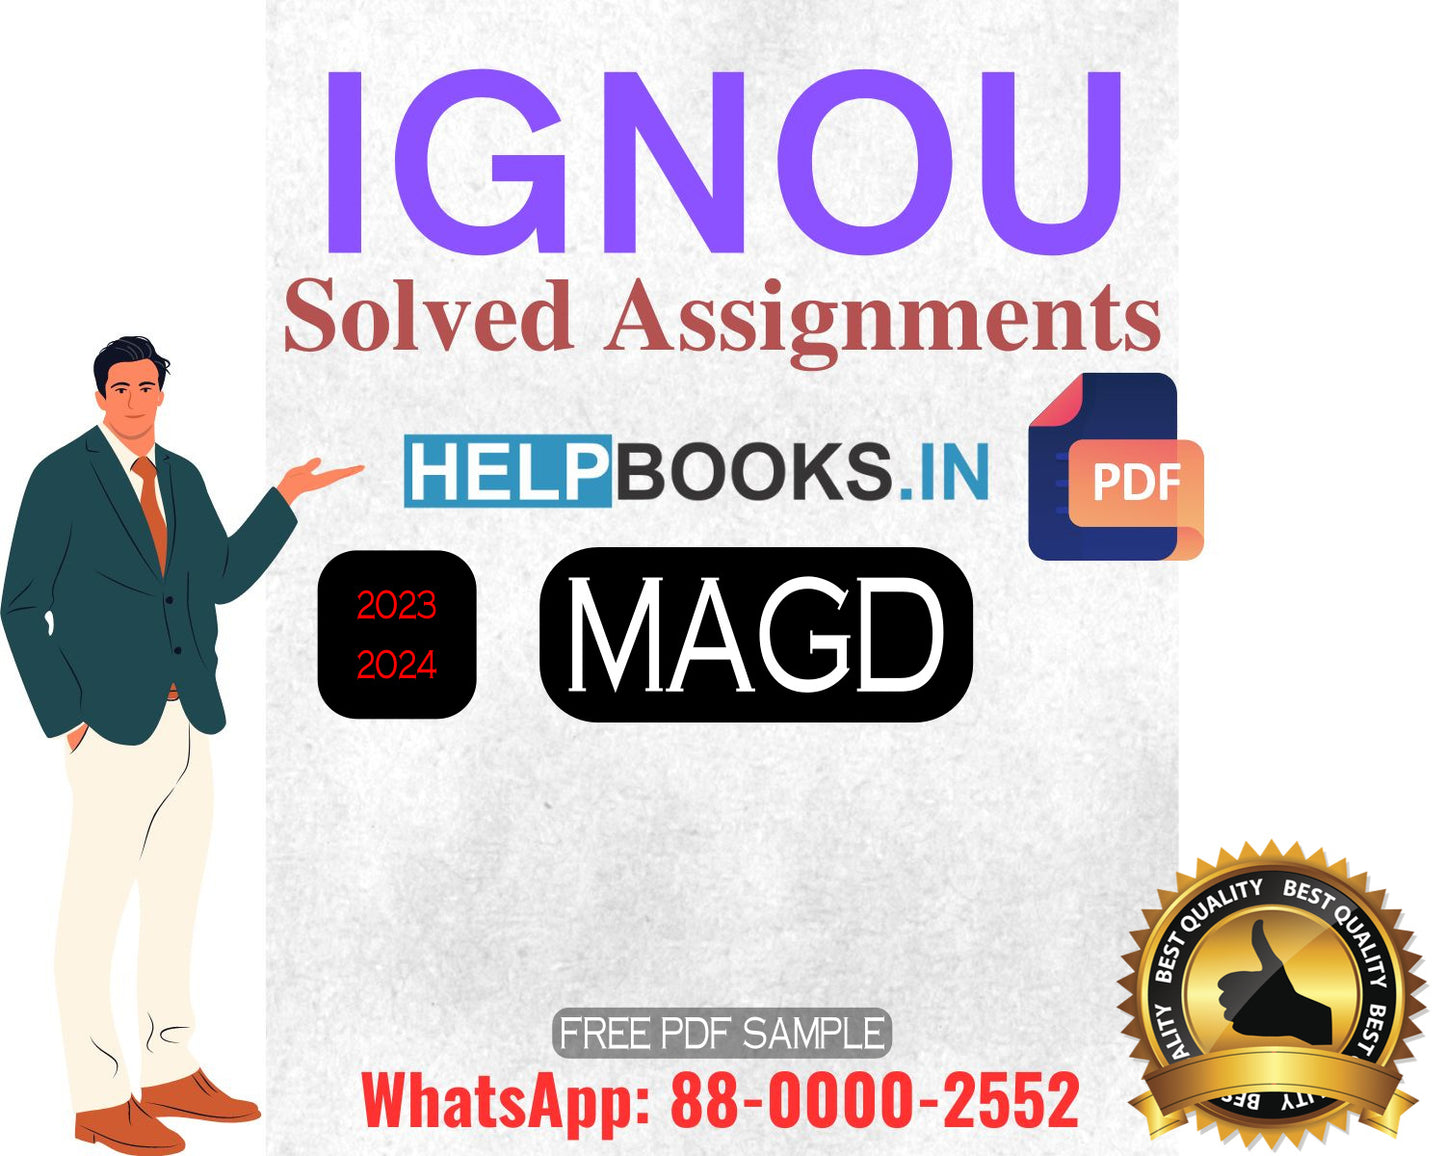 IGNOU Master's Degree Programme Latest IGNOU Solved Assignment 2023-24 & 2022-23 Sessions : MAGD Master of Arts Gender and Development Studies Solved Assignments